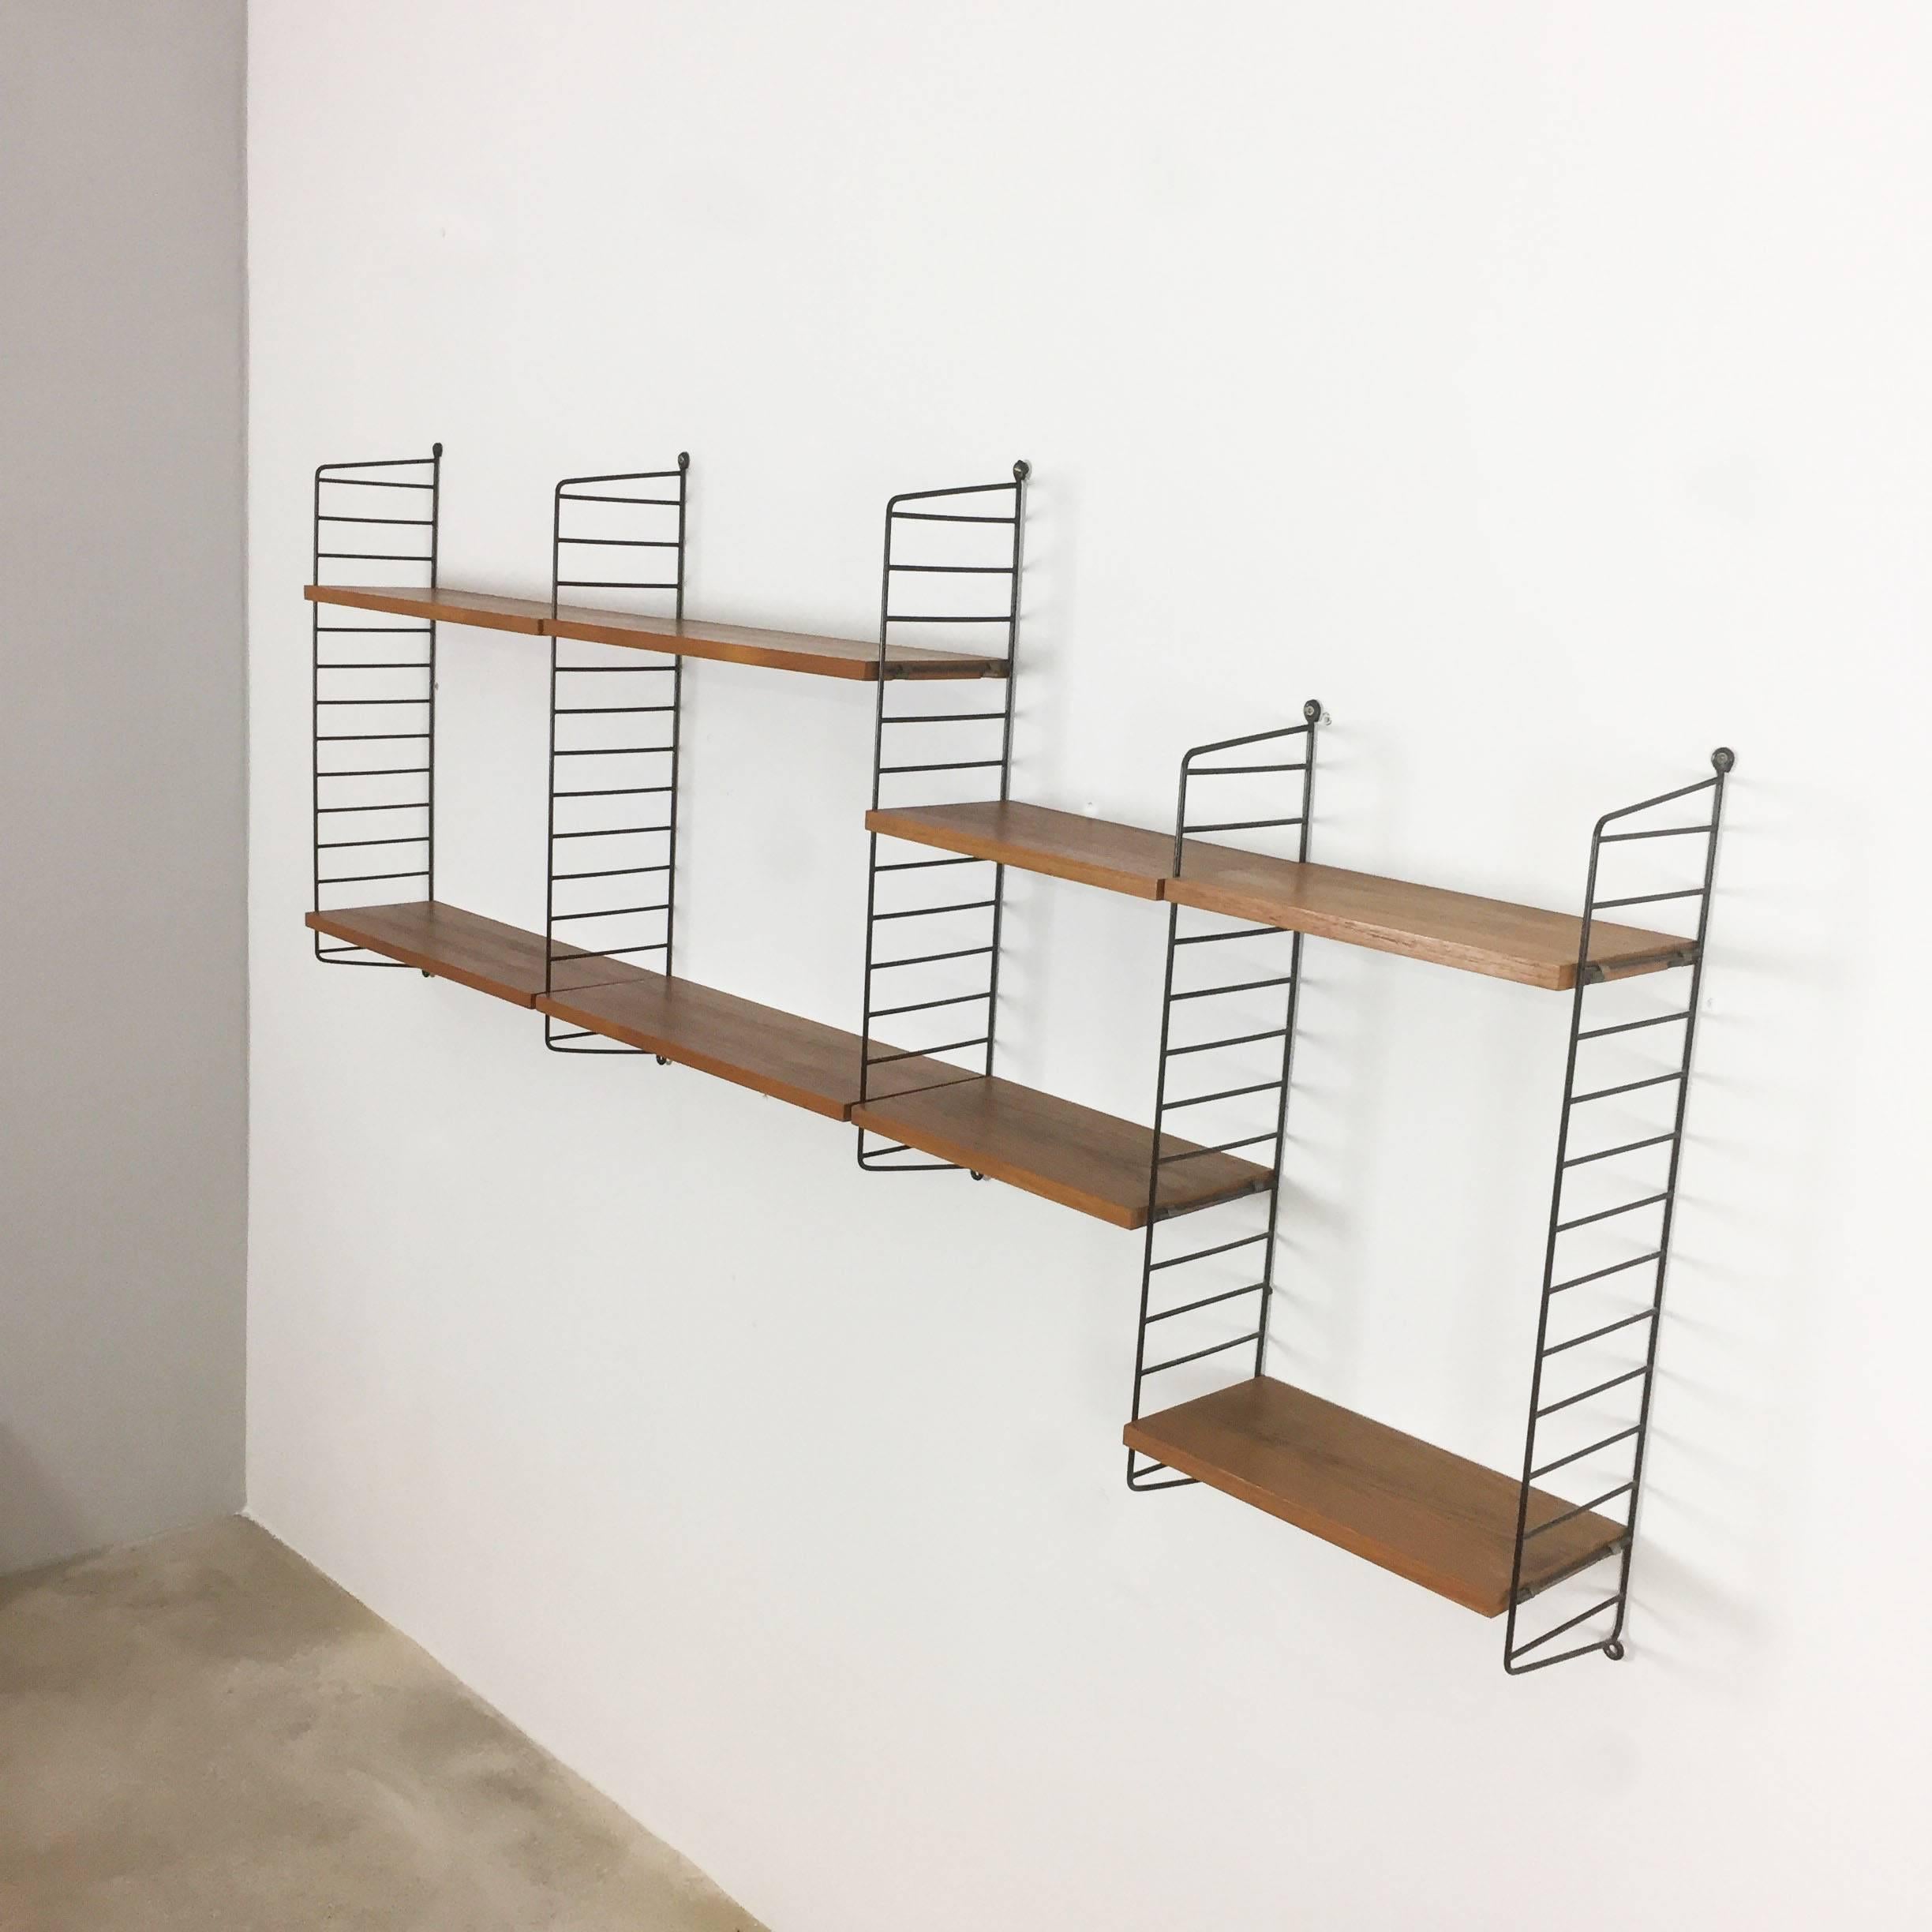 String Regal wall unit

Made in Sweden

Bokhyllan 'The Ladder Shelf'

Design: Nils und Kajsa Strinning, 1949

The architect Nisse Strinning was born in 1917. From 1940 to 1947 he studied architecture in Stockholm, before he designed the